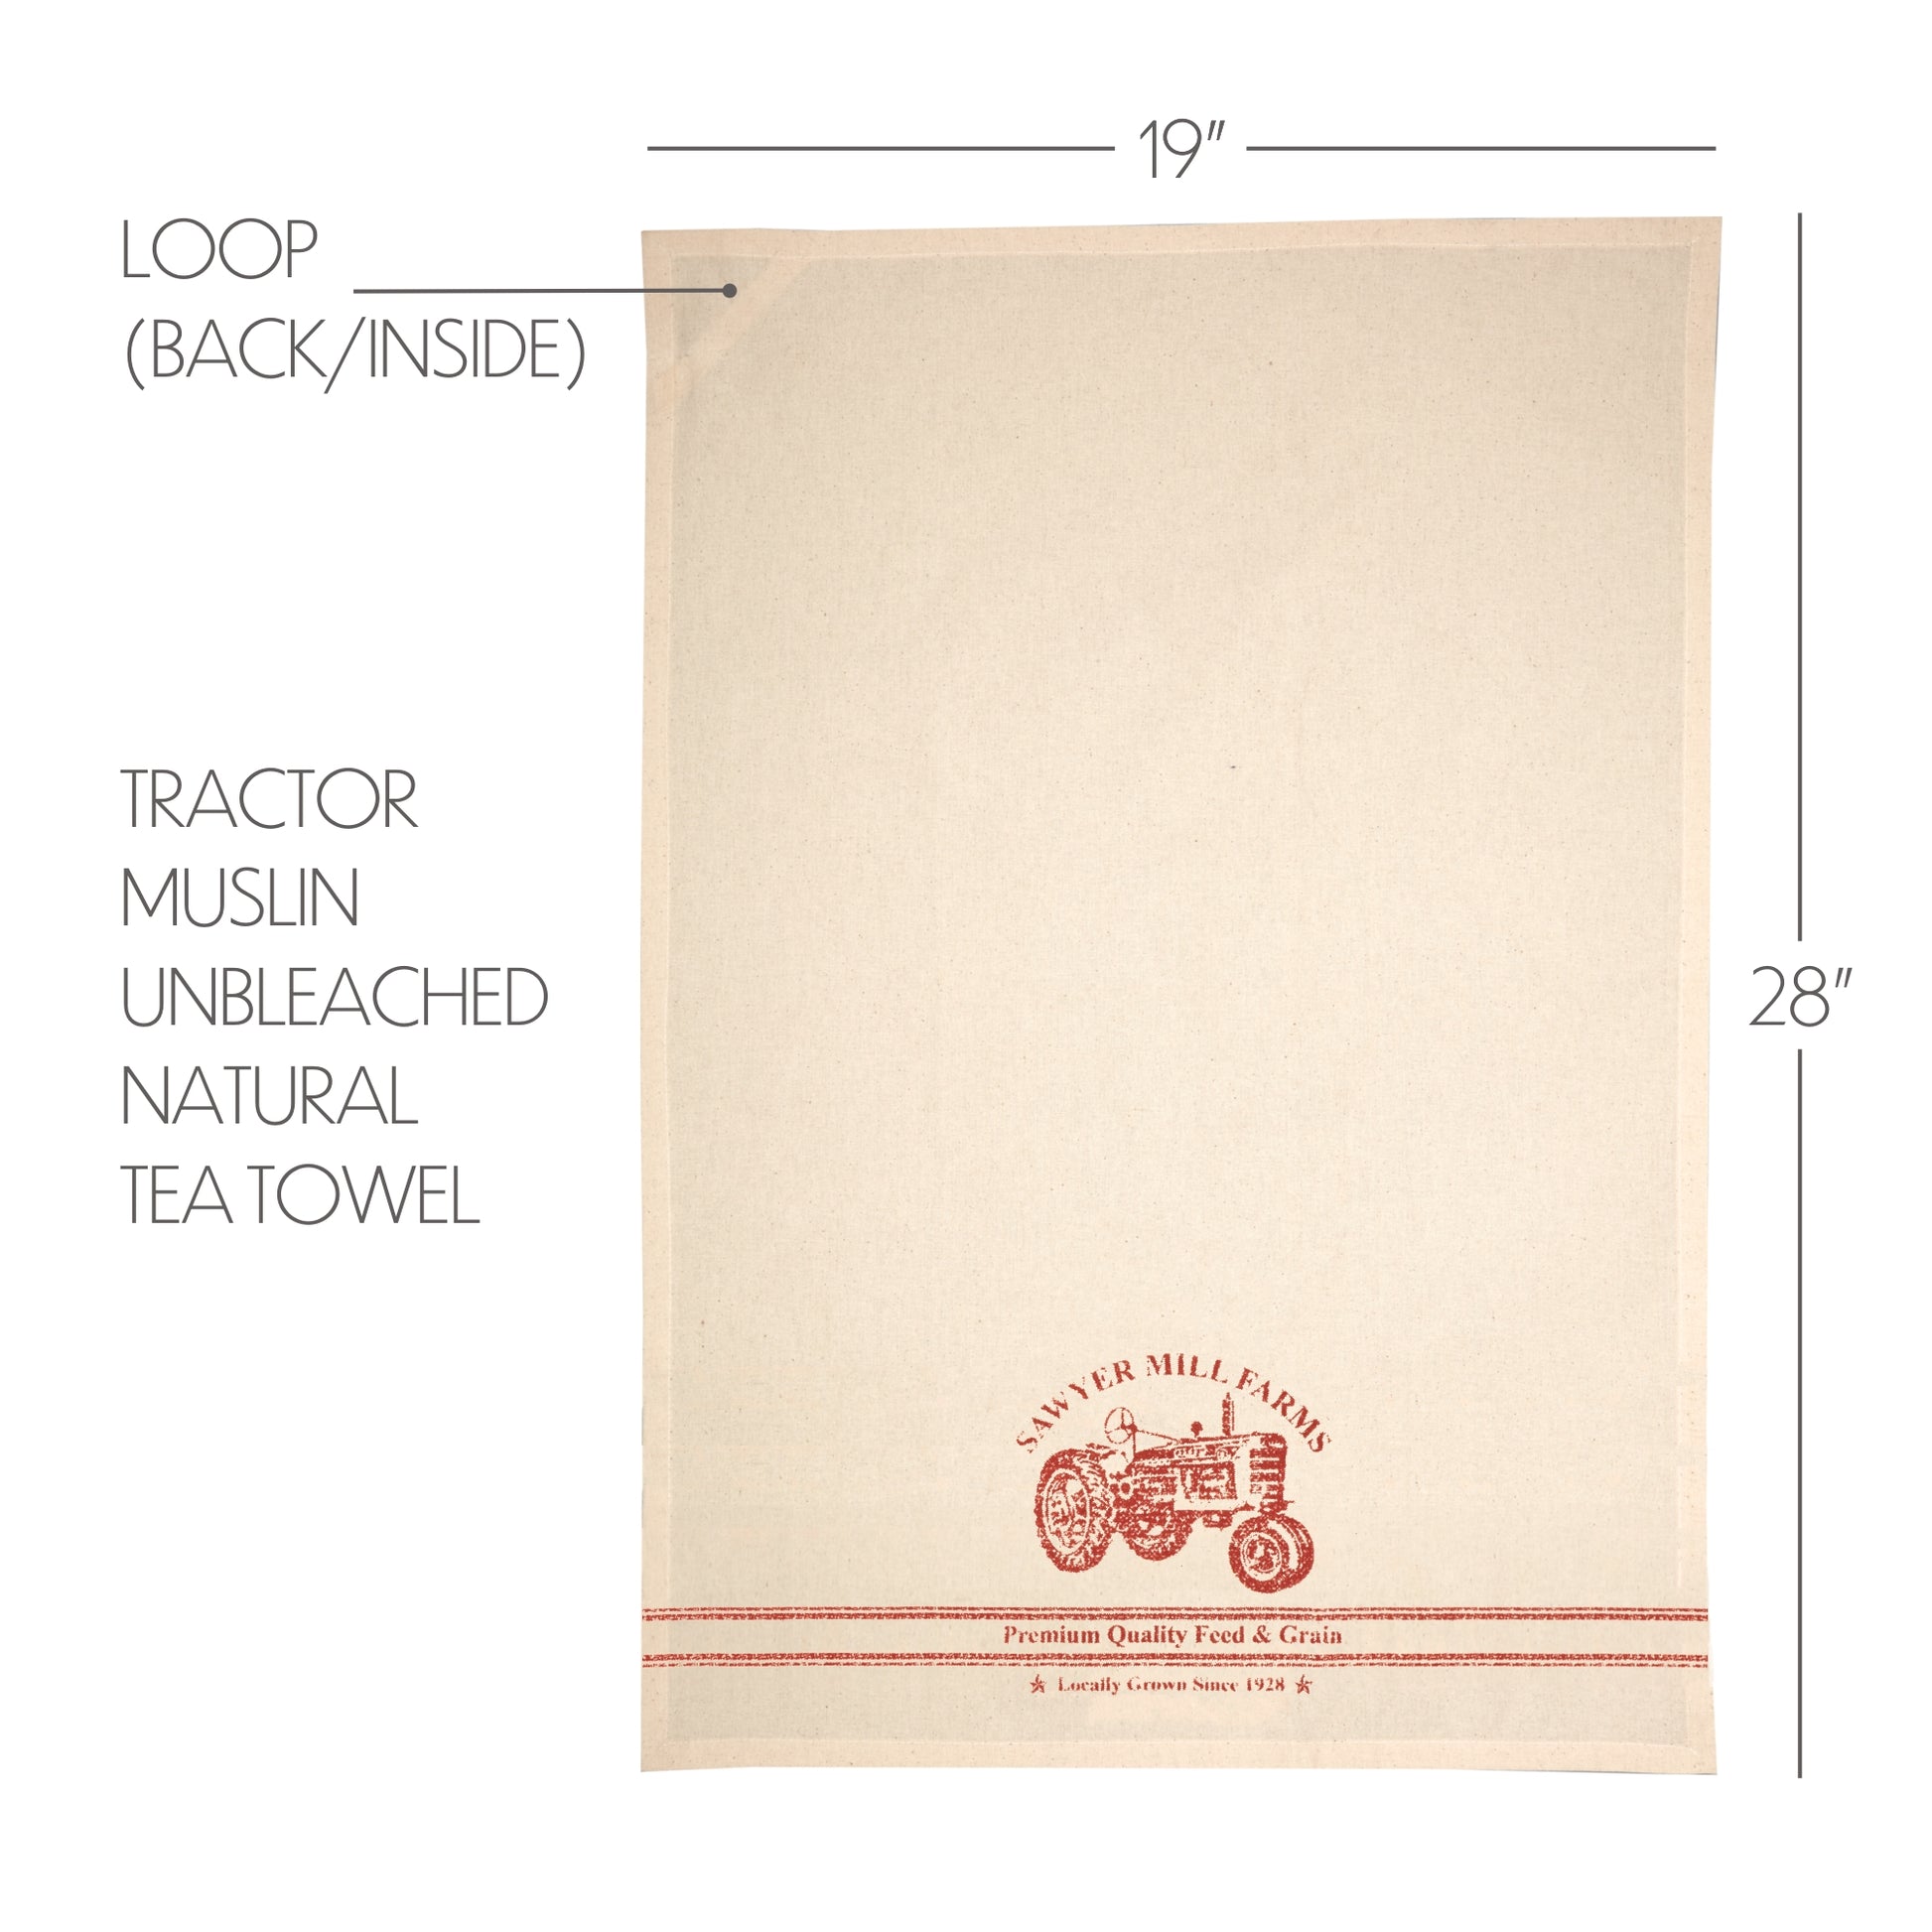 51346-Sawyer-Mill-Red-Tractor-Muslin-Unbleached-Natural-Tea-Towel-19x28-image-1